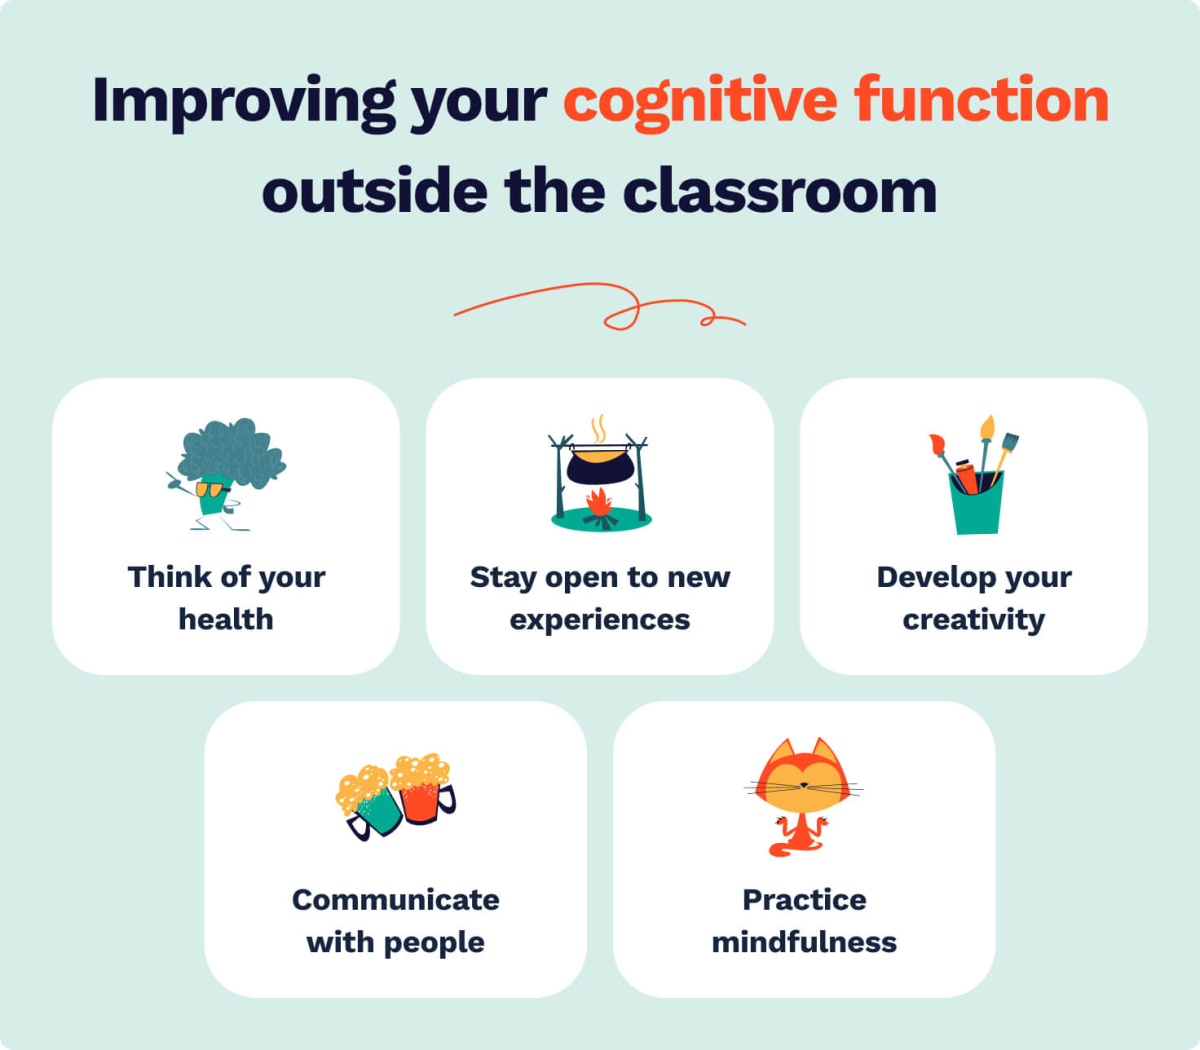 The picture lists the ways to improve one's cognitive function outside the classroom.